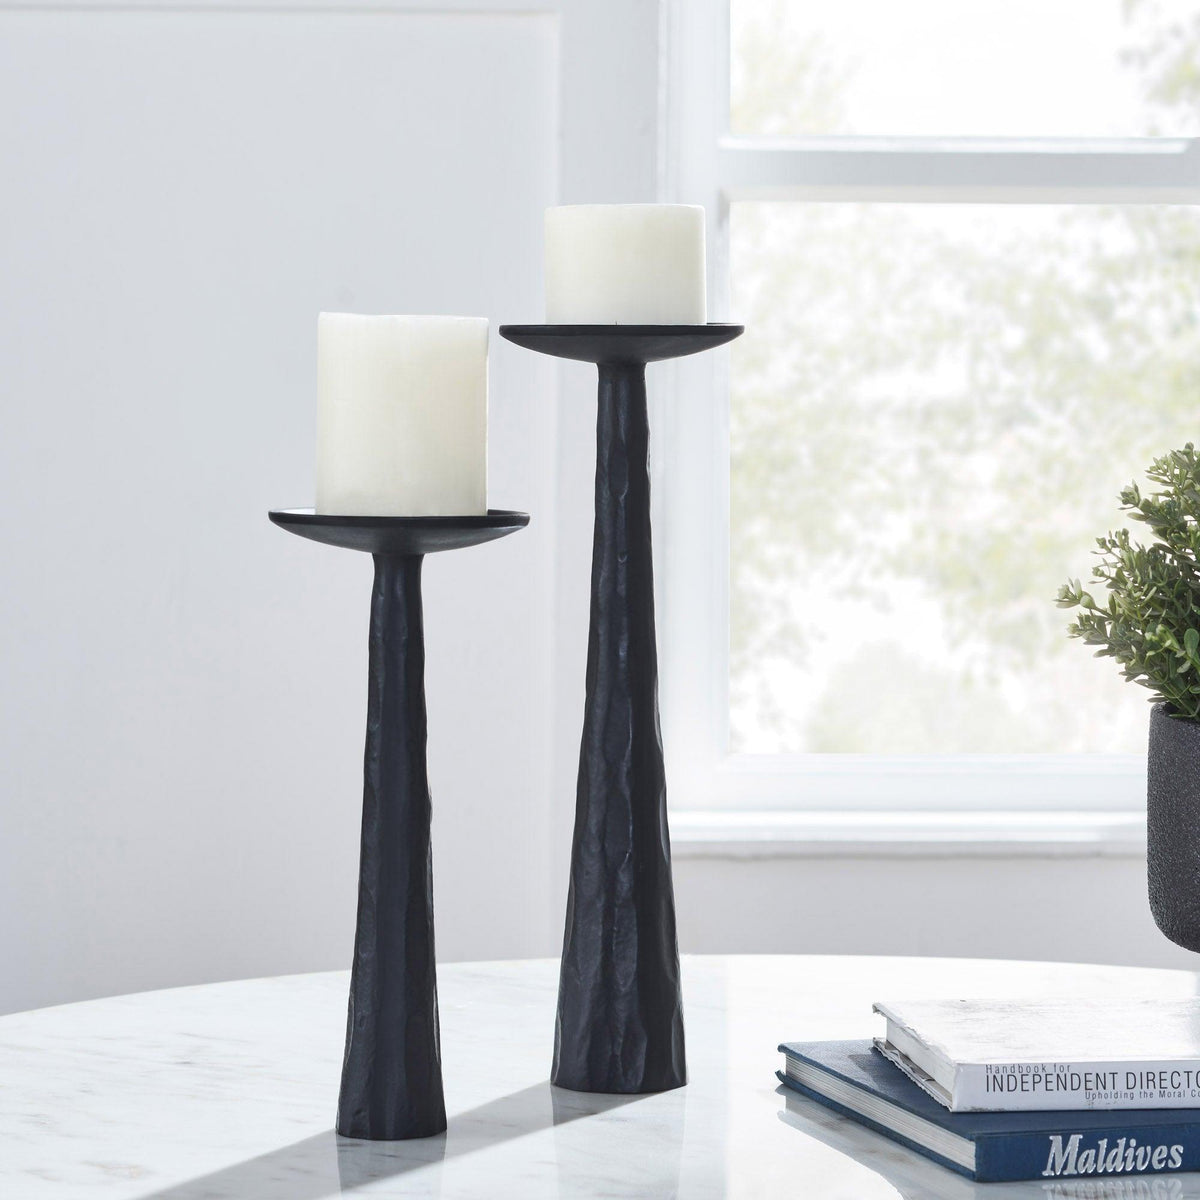 Renwil - Tilde Set Of 2 Tapered Pillar Candle Holders - CAN181 | Montreal Lighting & Hardware